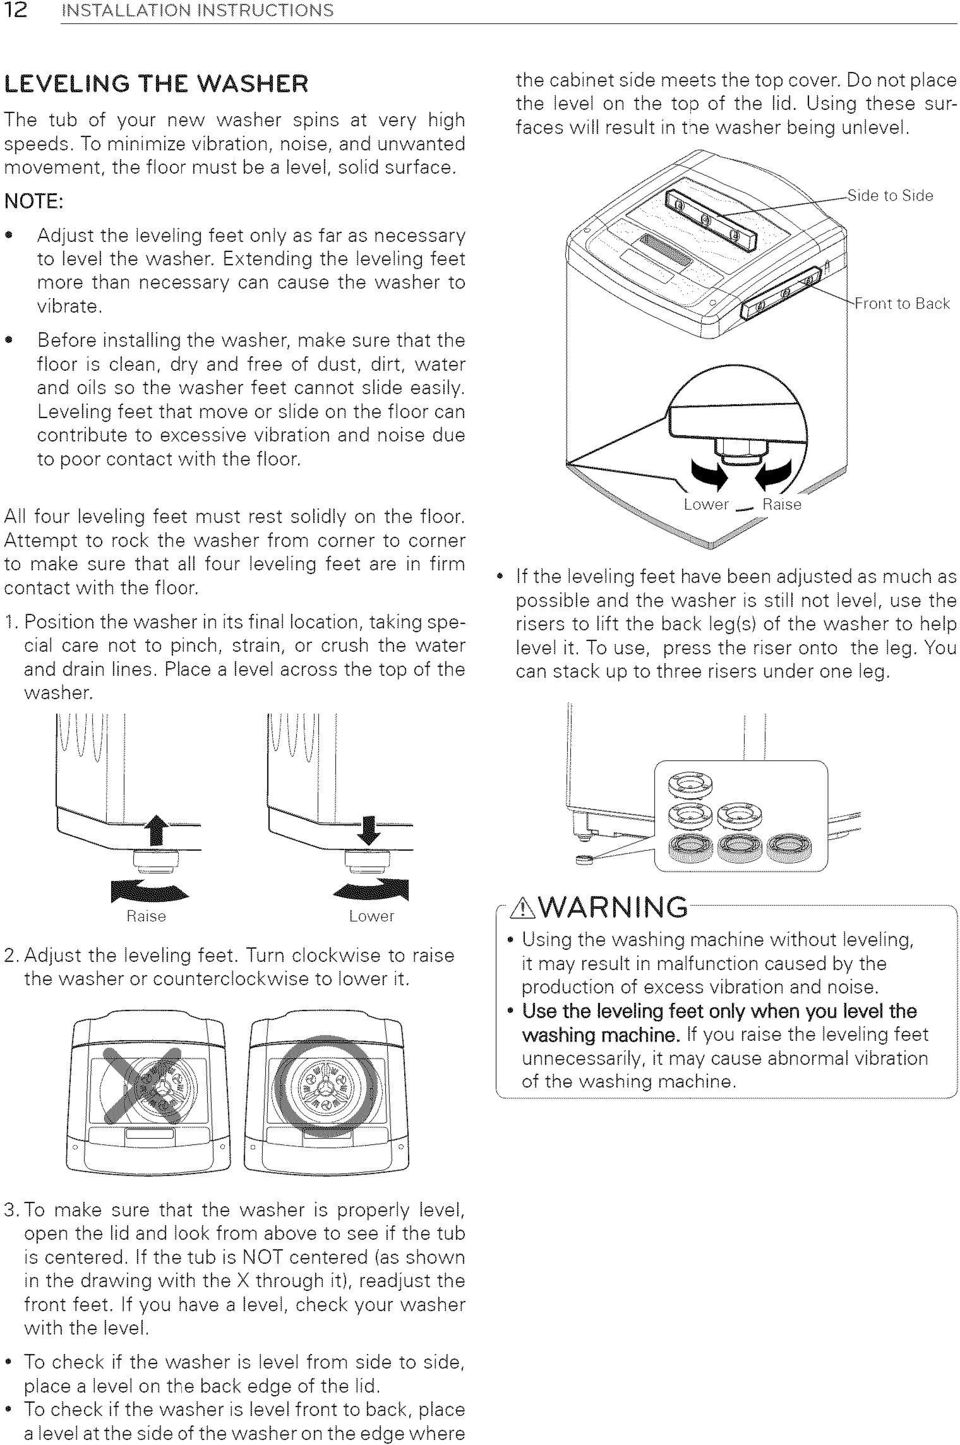 to Side Adjust the leveling feet only as far as necessary to level the washer. Extending the leveling feet more than necessary can cause the washer to vibrate.